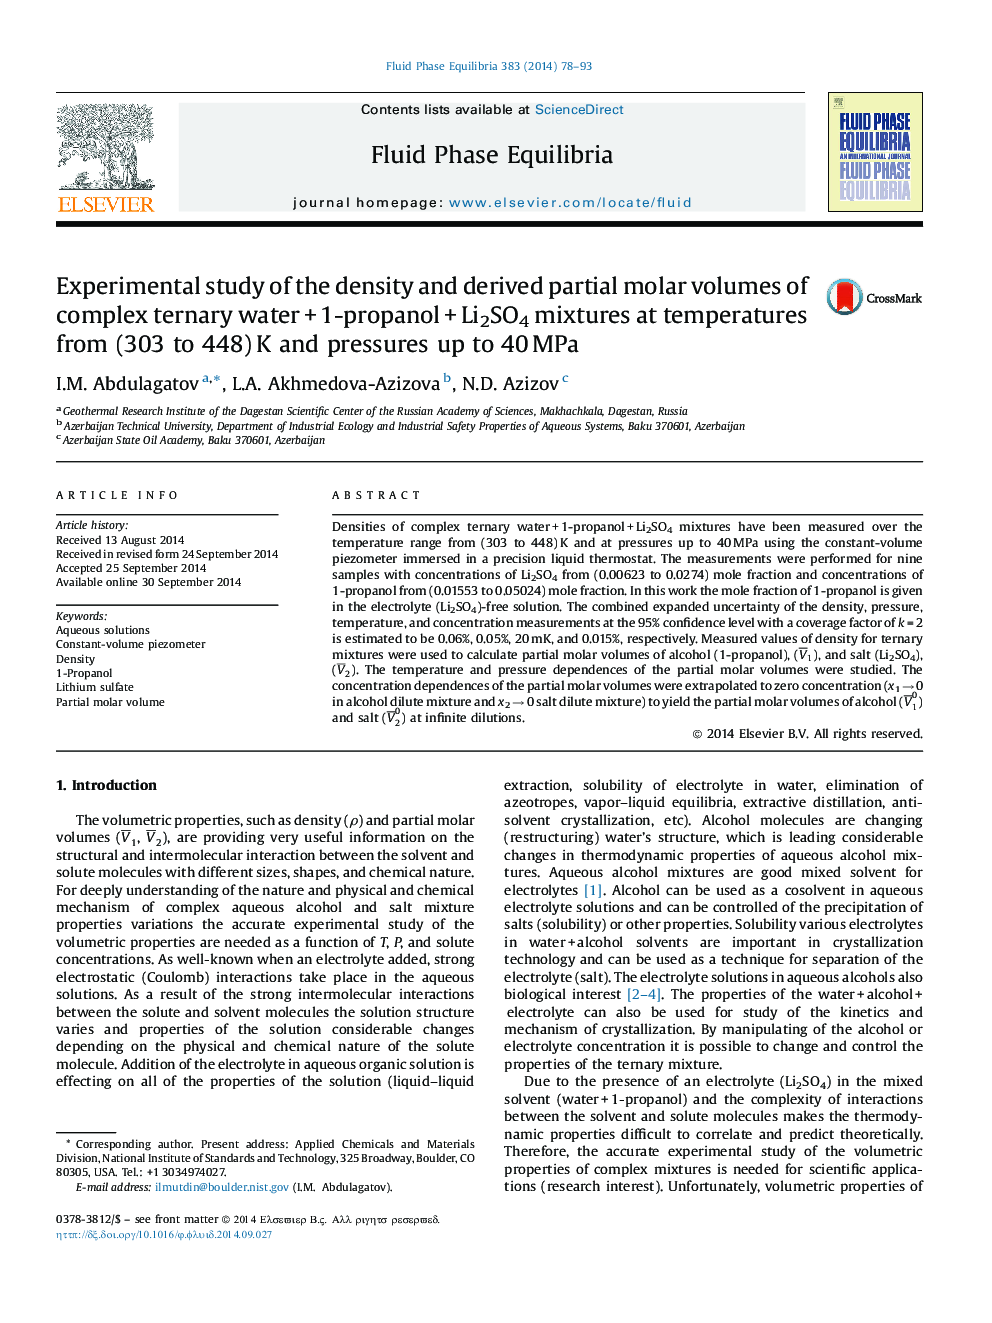 Experimental study of the density and derived partial molar volumes of complex ternary water + 1-propanol + Li2SO4 mixtures at temperatures from (303 to 448) K and pressures up to 40 MPa